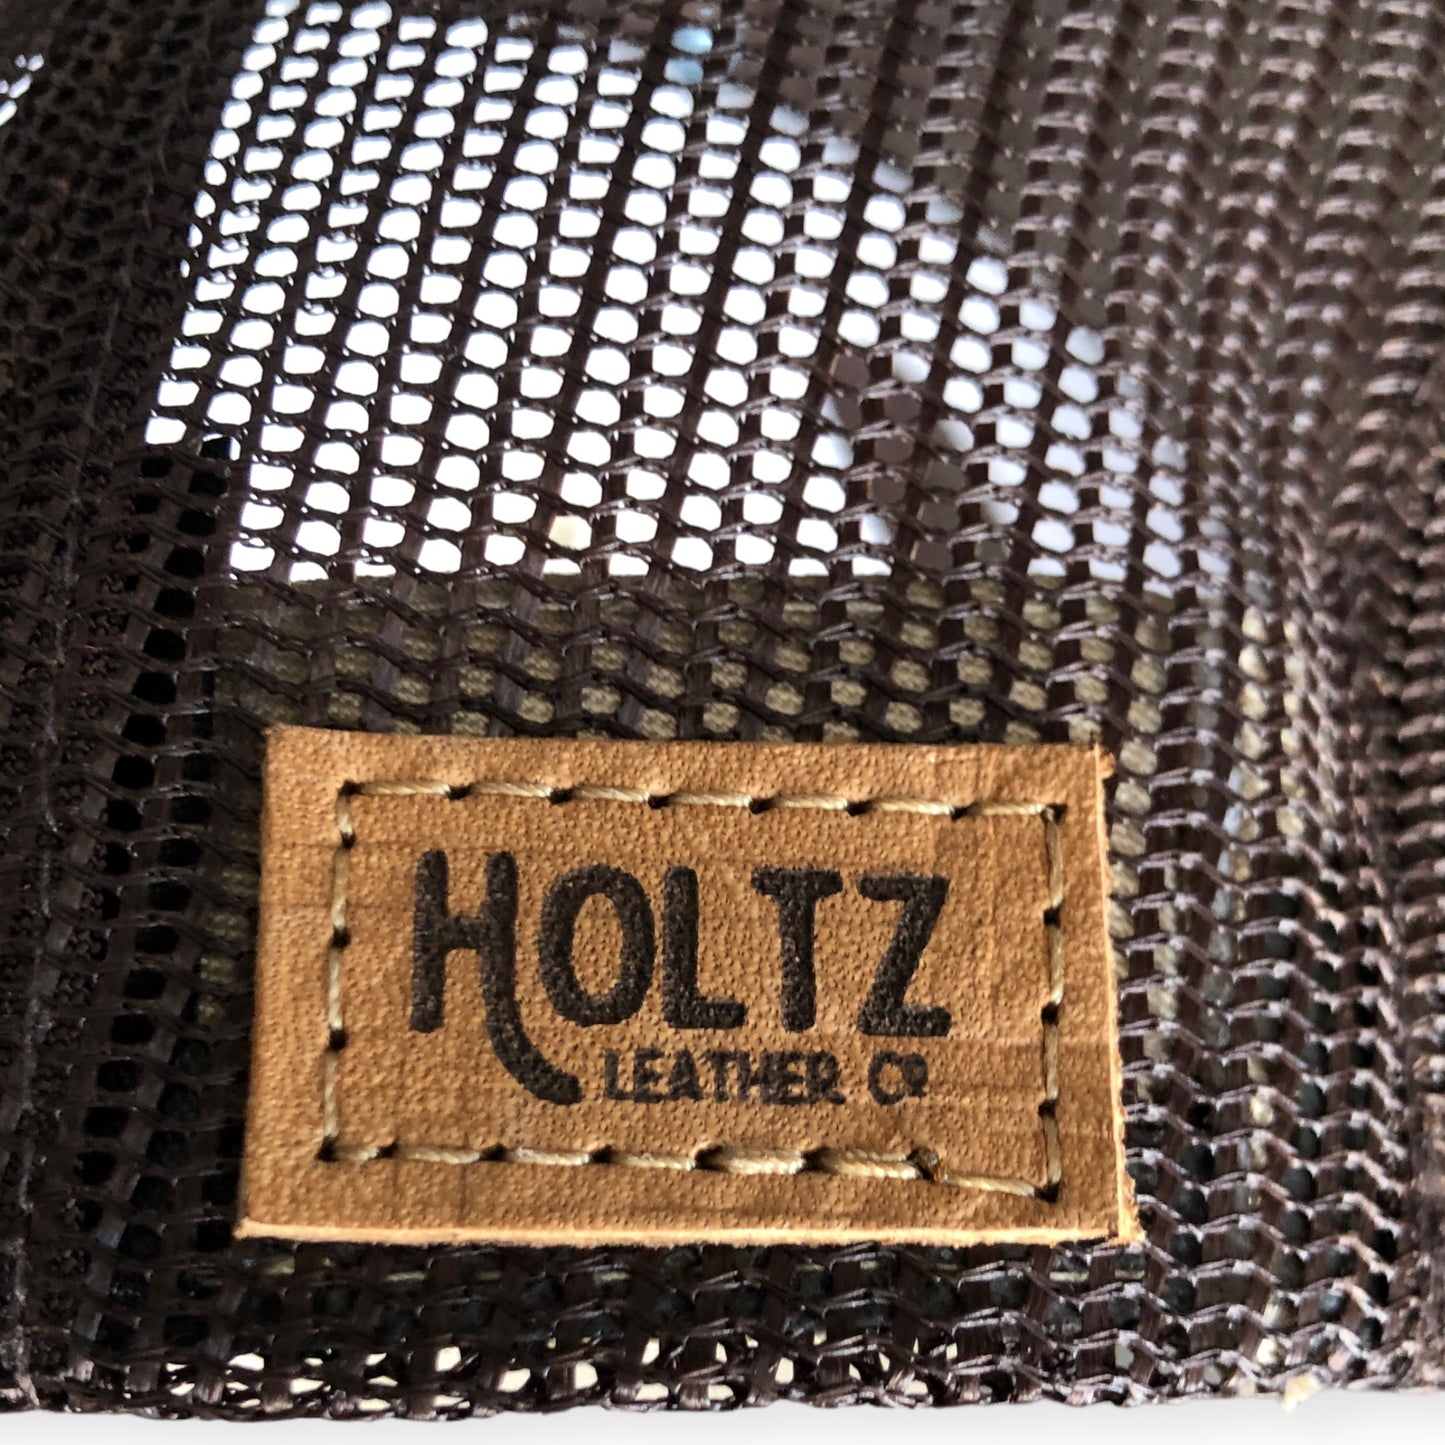 Holtz x Connect Roasters Leather Patch Hat